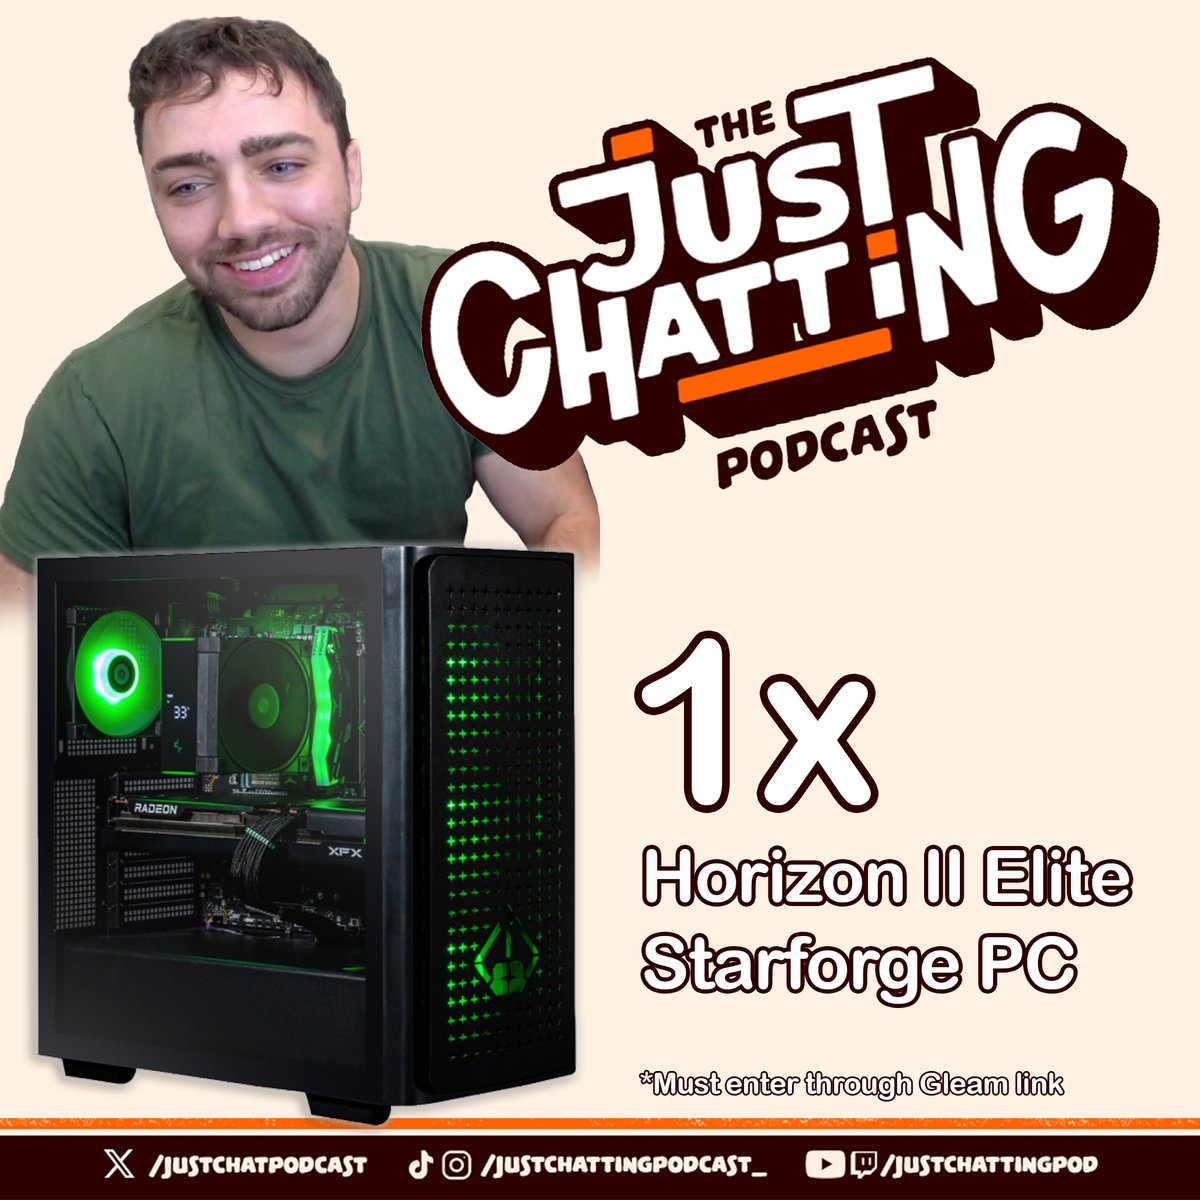 MIZKIF HAS LAUNCHED HIS PODCAST 🎙️ To celebrate, he's giving away a Horizon II Elite @StarforgePCs PC! To enter: - Like & RT - Follow @JustChatPodcast - Enter using the Gleam link in reply below Ends in 10 days. Worldwide. GOOD LUCK 🤩